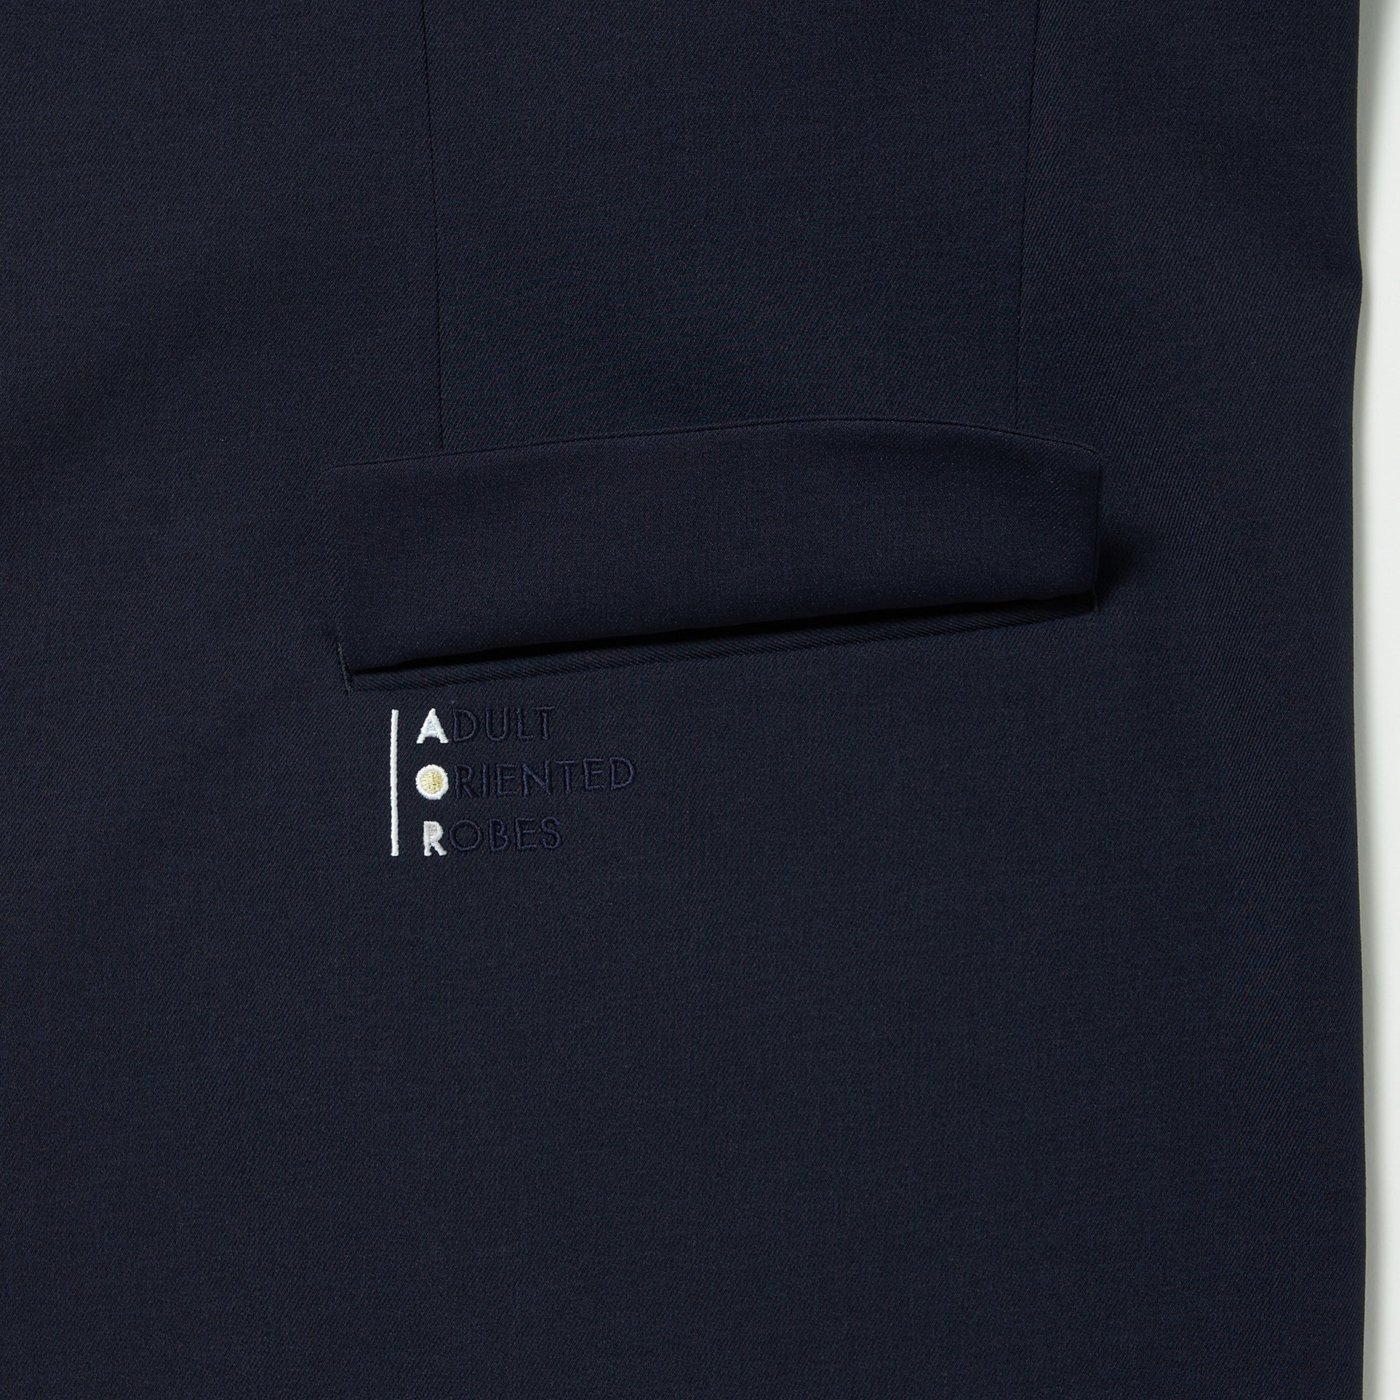 Adult Oriented Robes * Monochrome * Navy